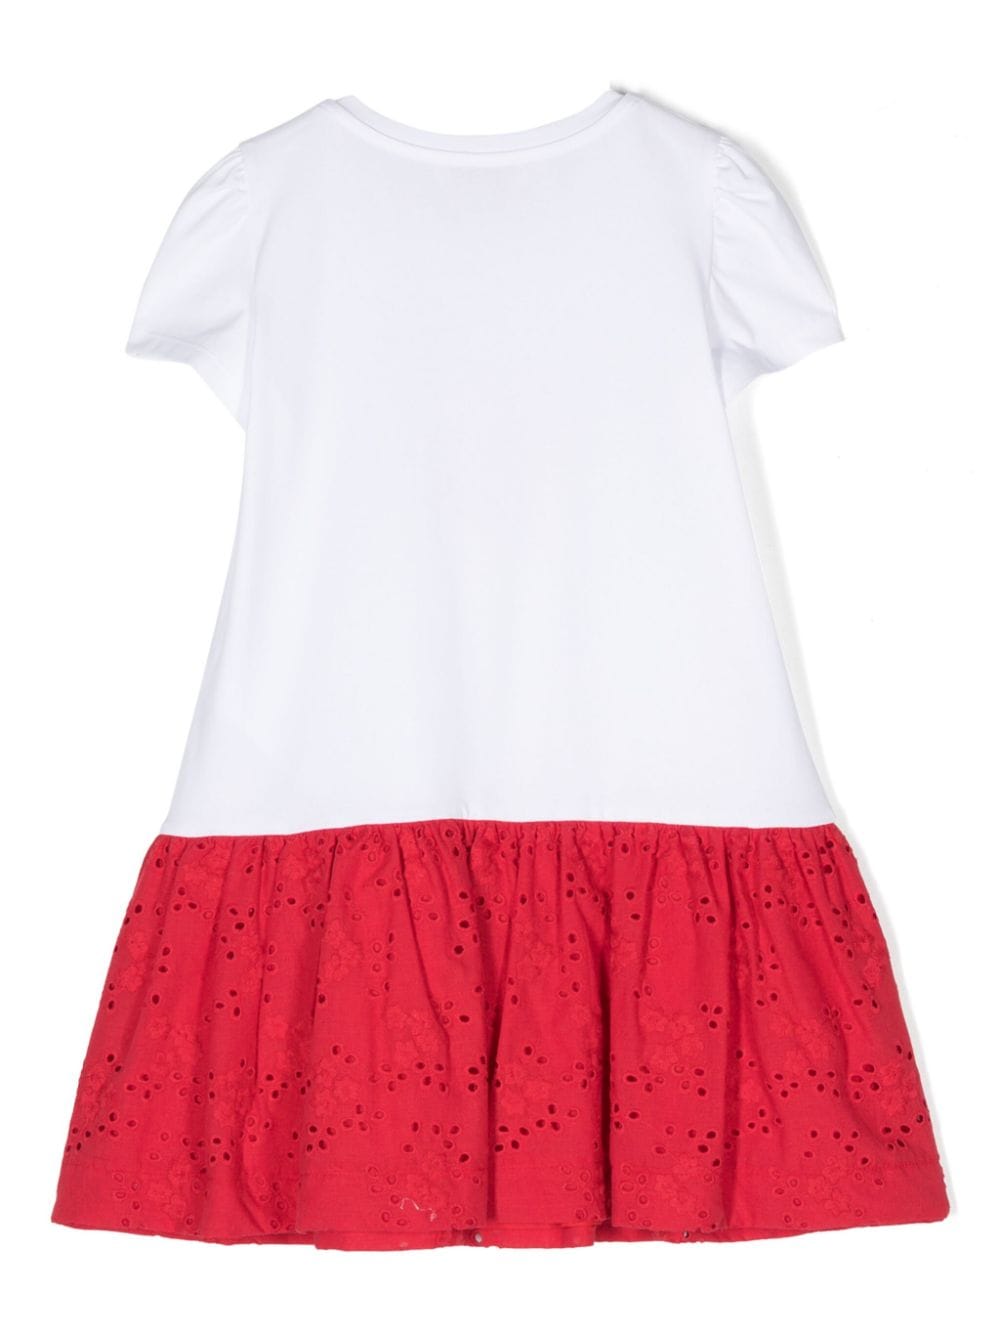 Robe fille blanche/rouge